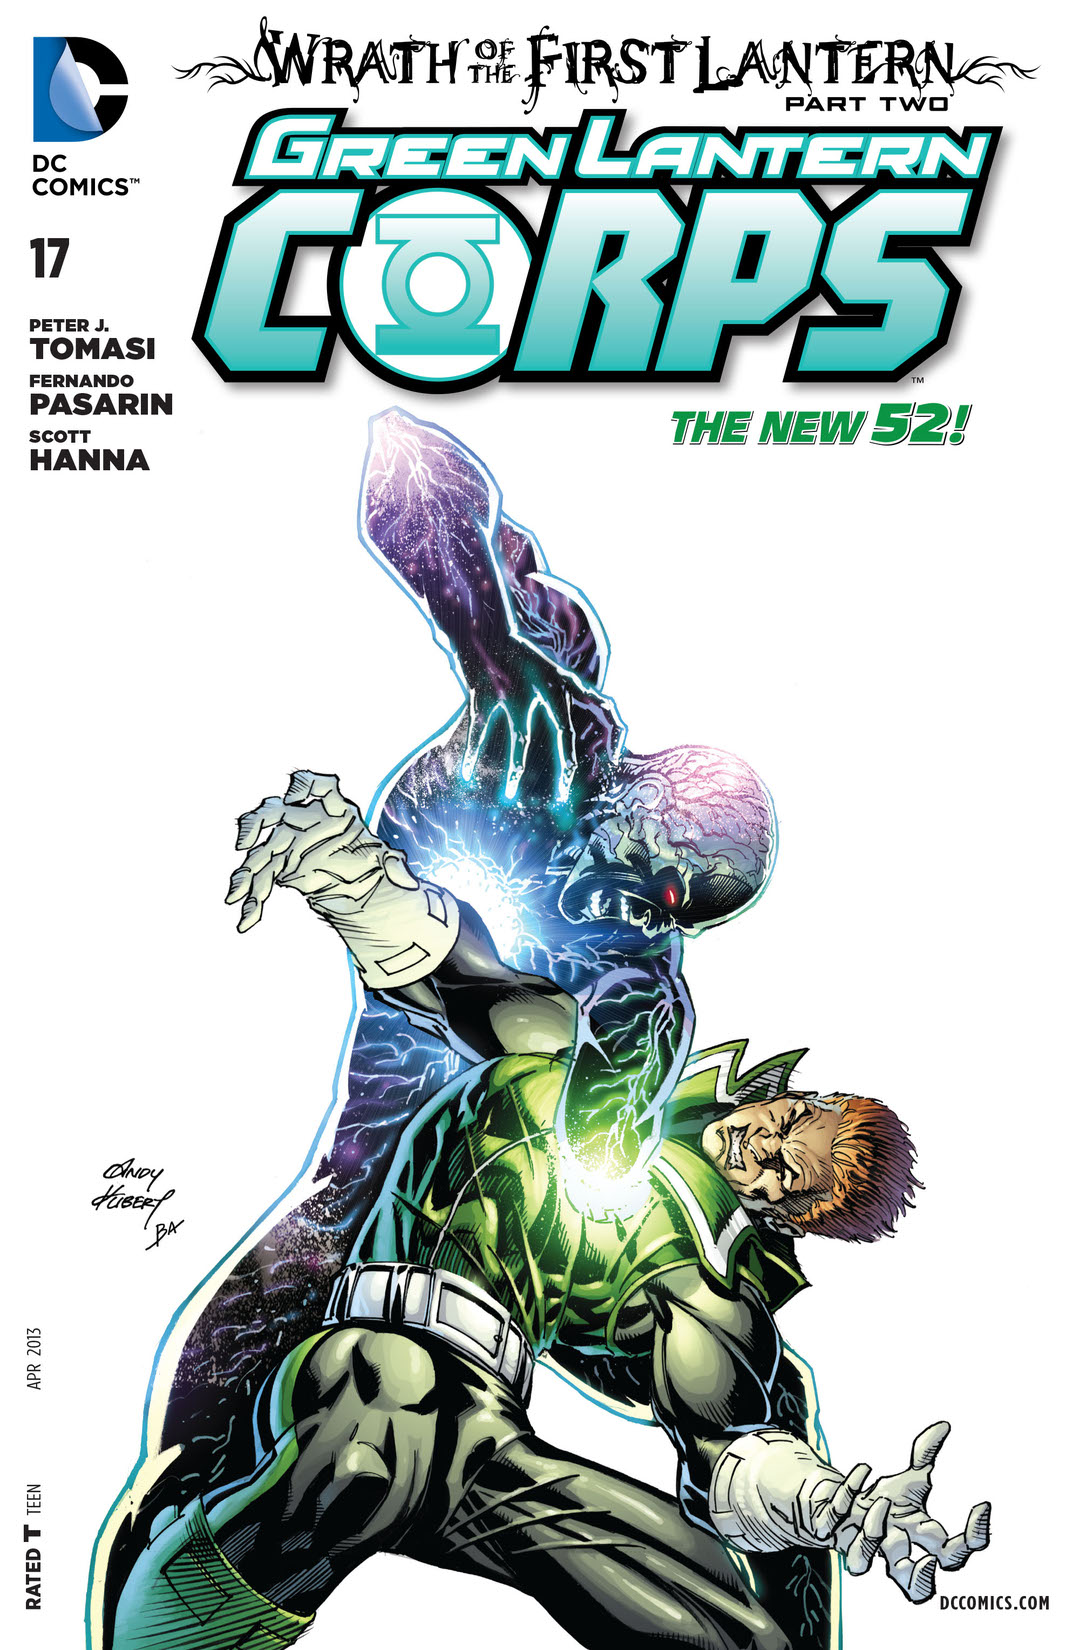 Green Lantern Corps (2011-) #17 preview images